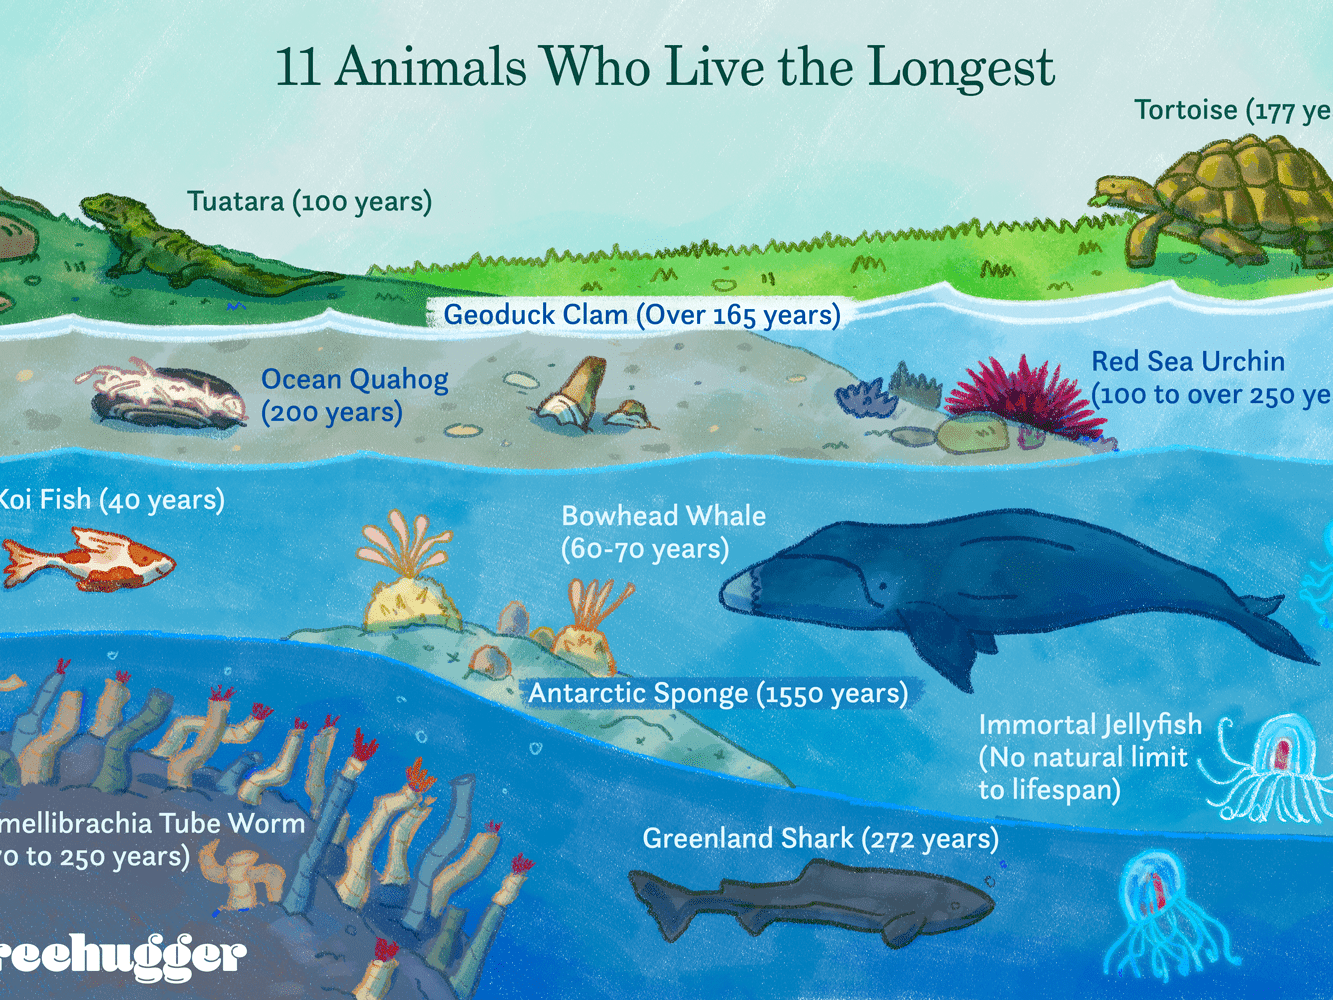 What animal lives the longest in the world?